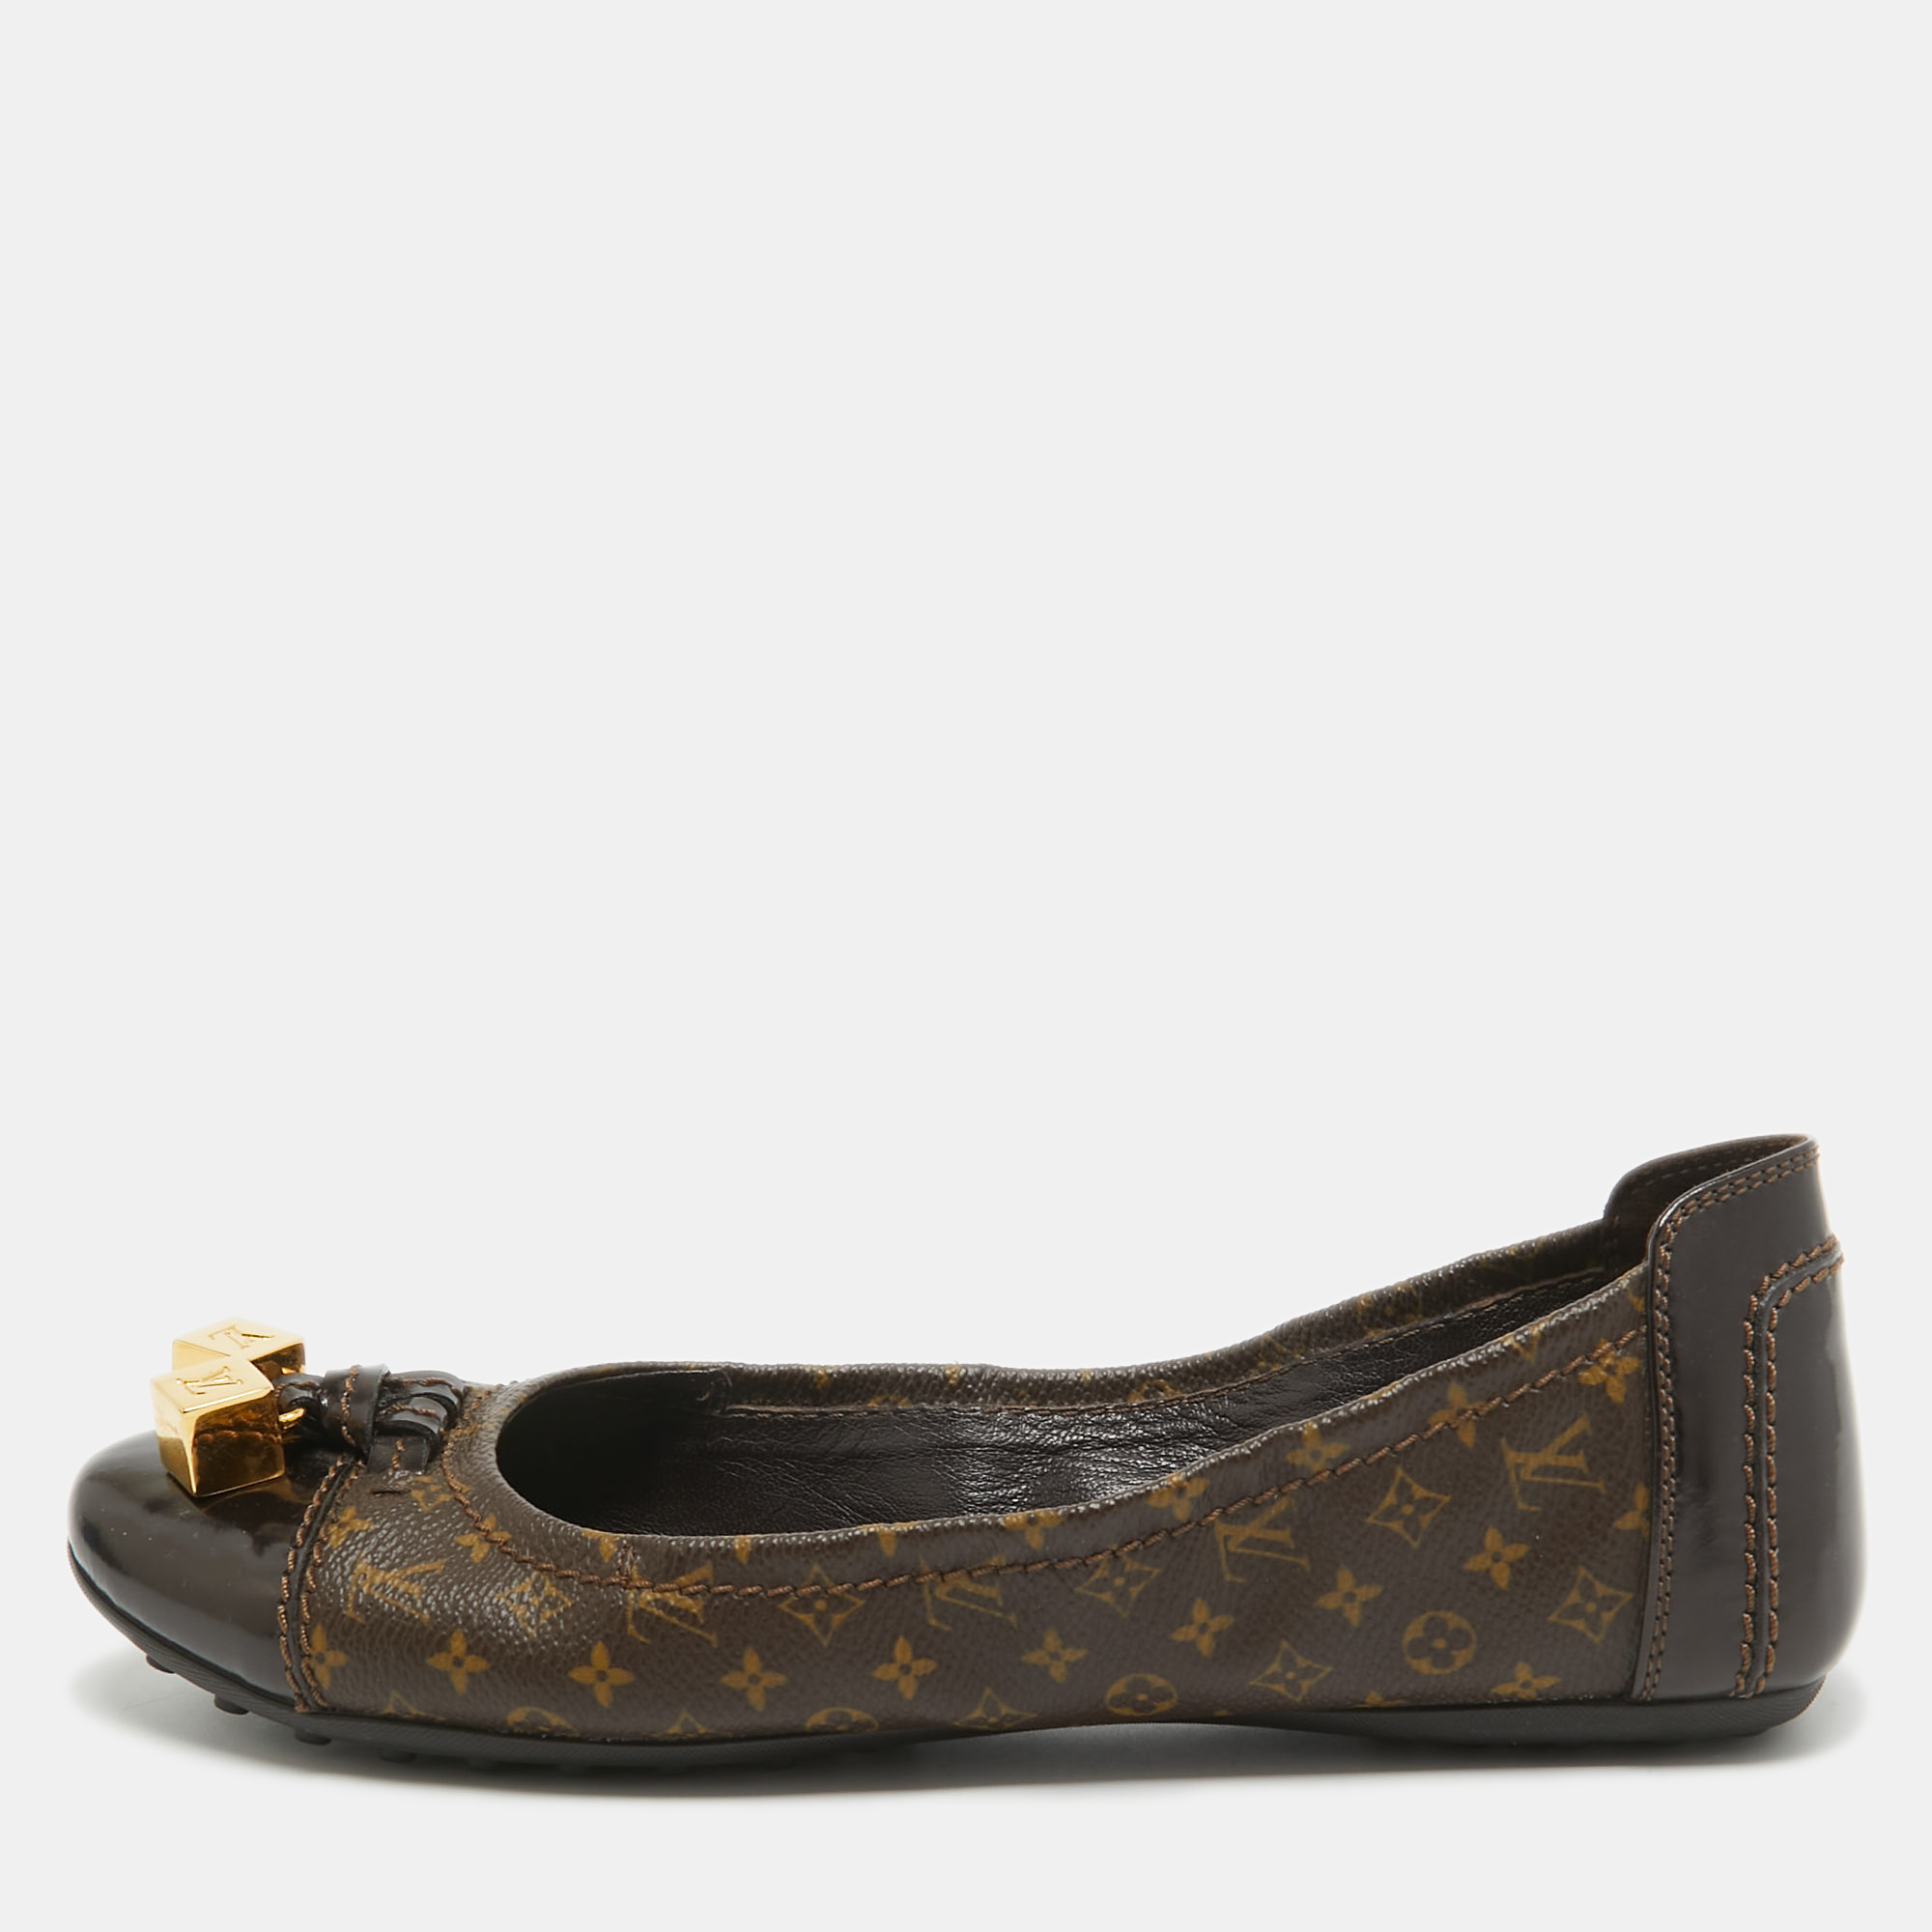 Louis vuitton monogram canvas and patent leather lovely ballet flats size 38